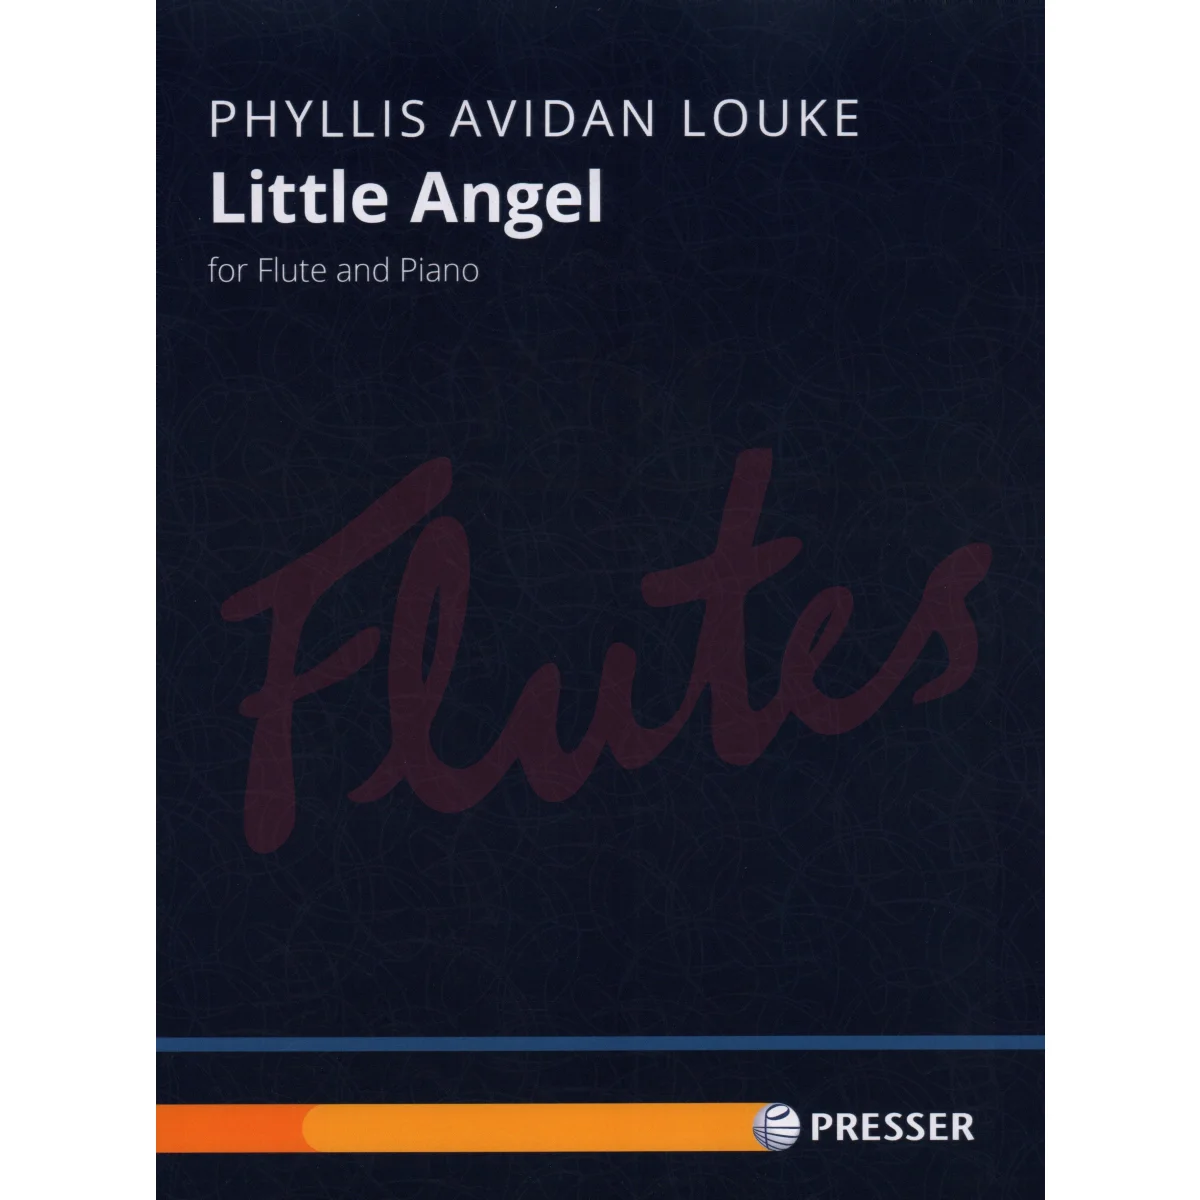 Little Angel for Flute and Piano